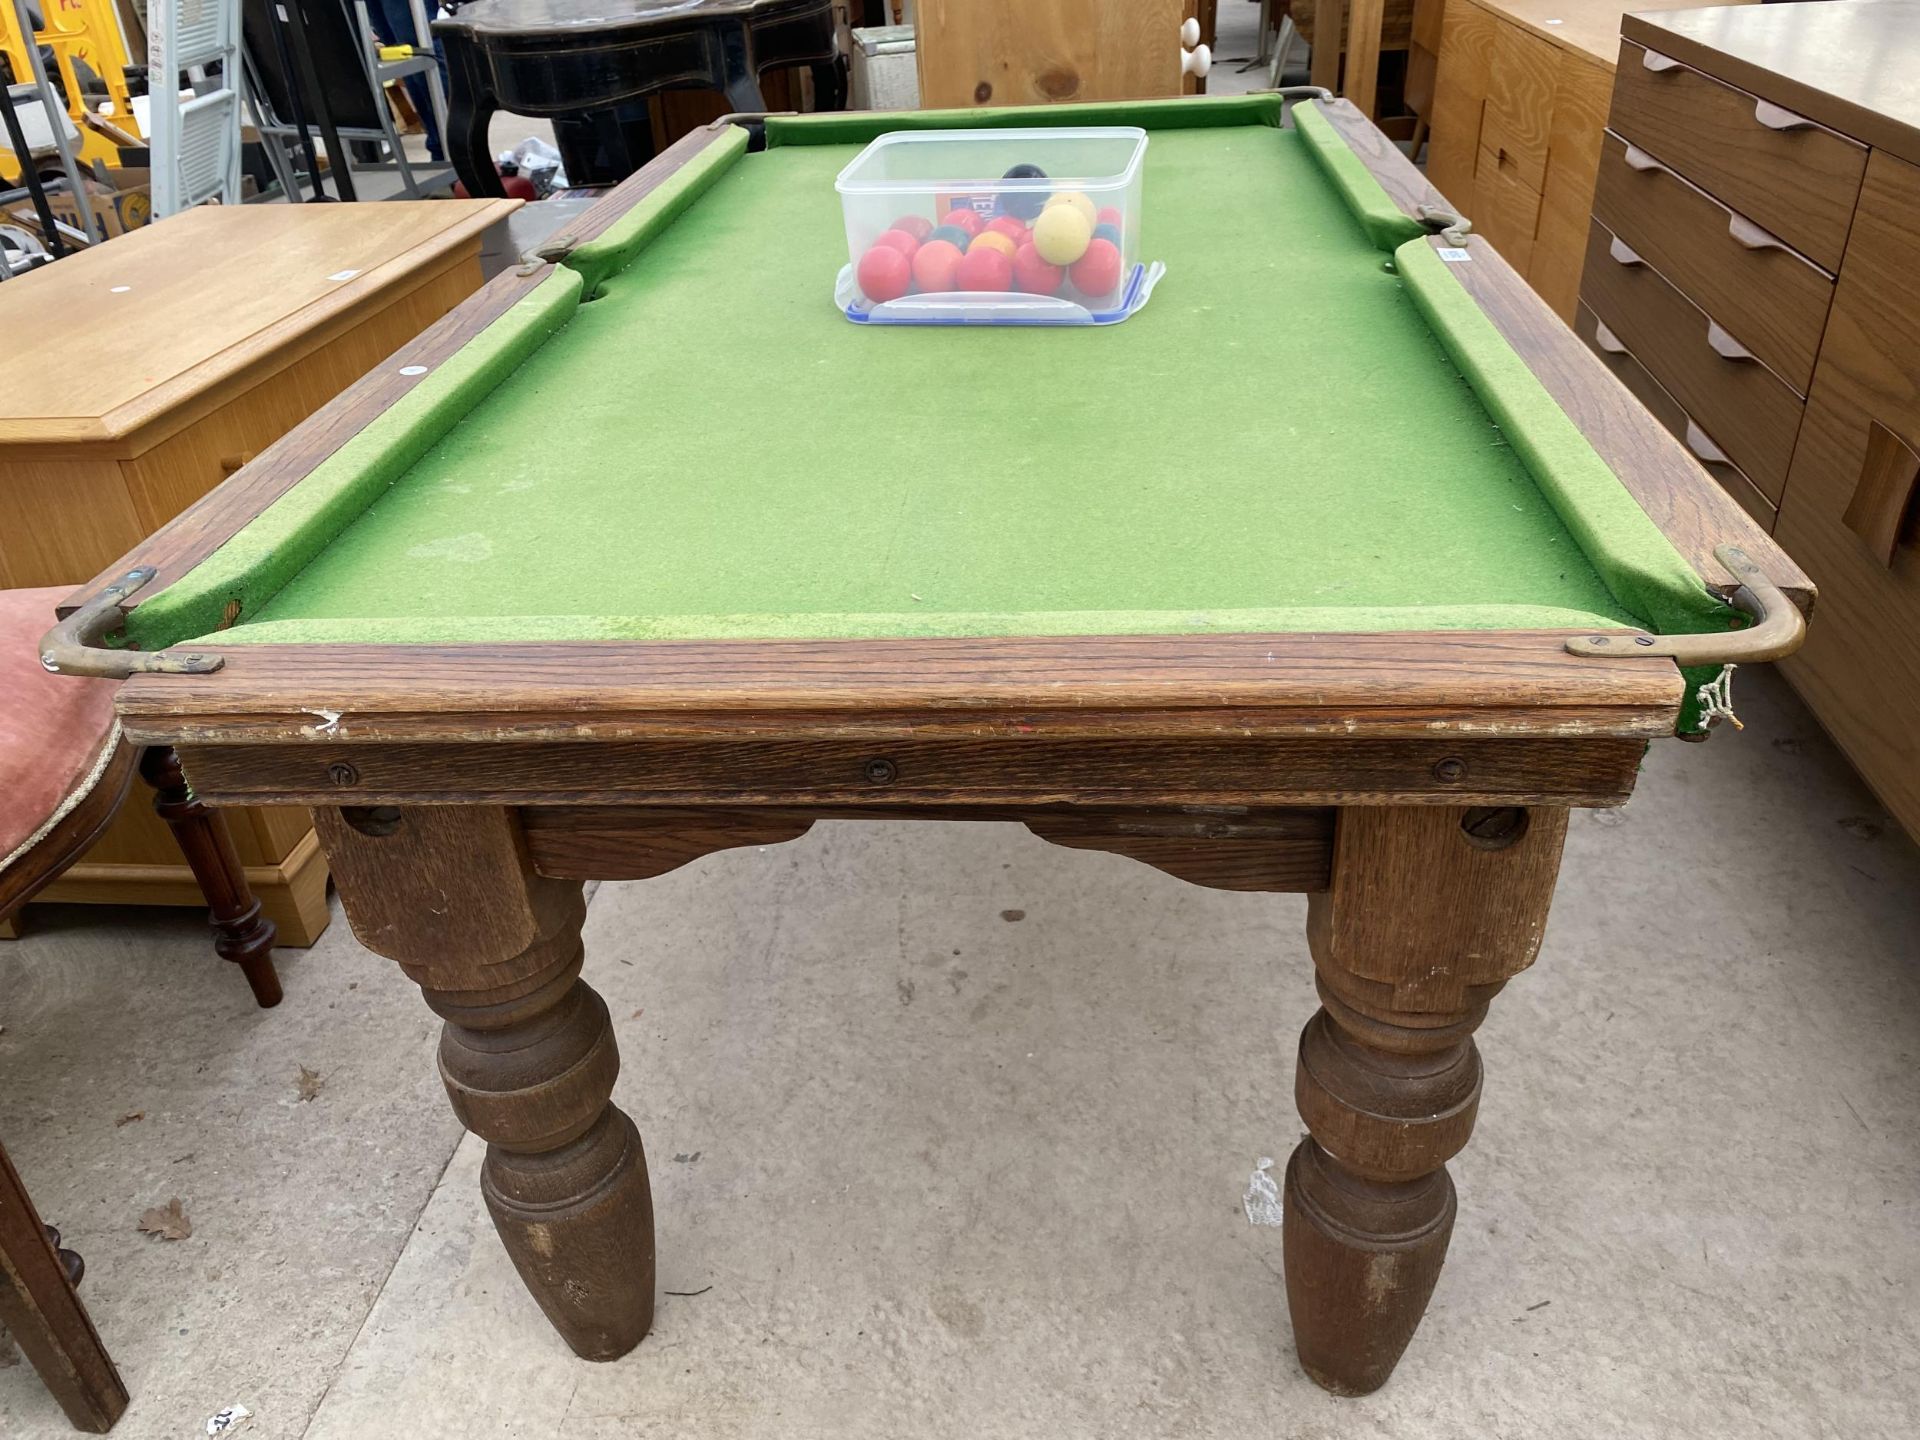 A SMALL SNOOKER TABLE (64X34") ON OAK BASE WITH TURNED LEGS, COMPLETE WITH SNOOKER BALLS AND - Image 2 of 4